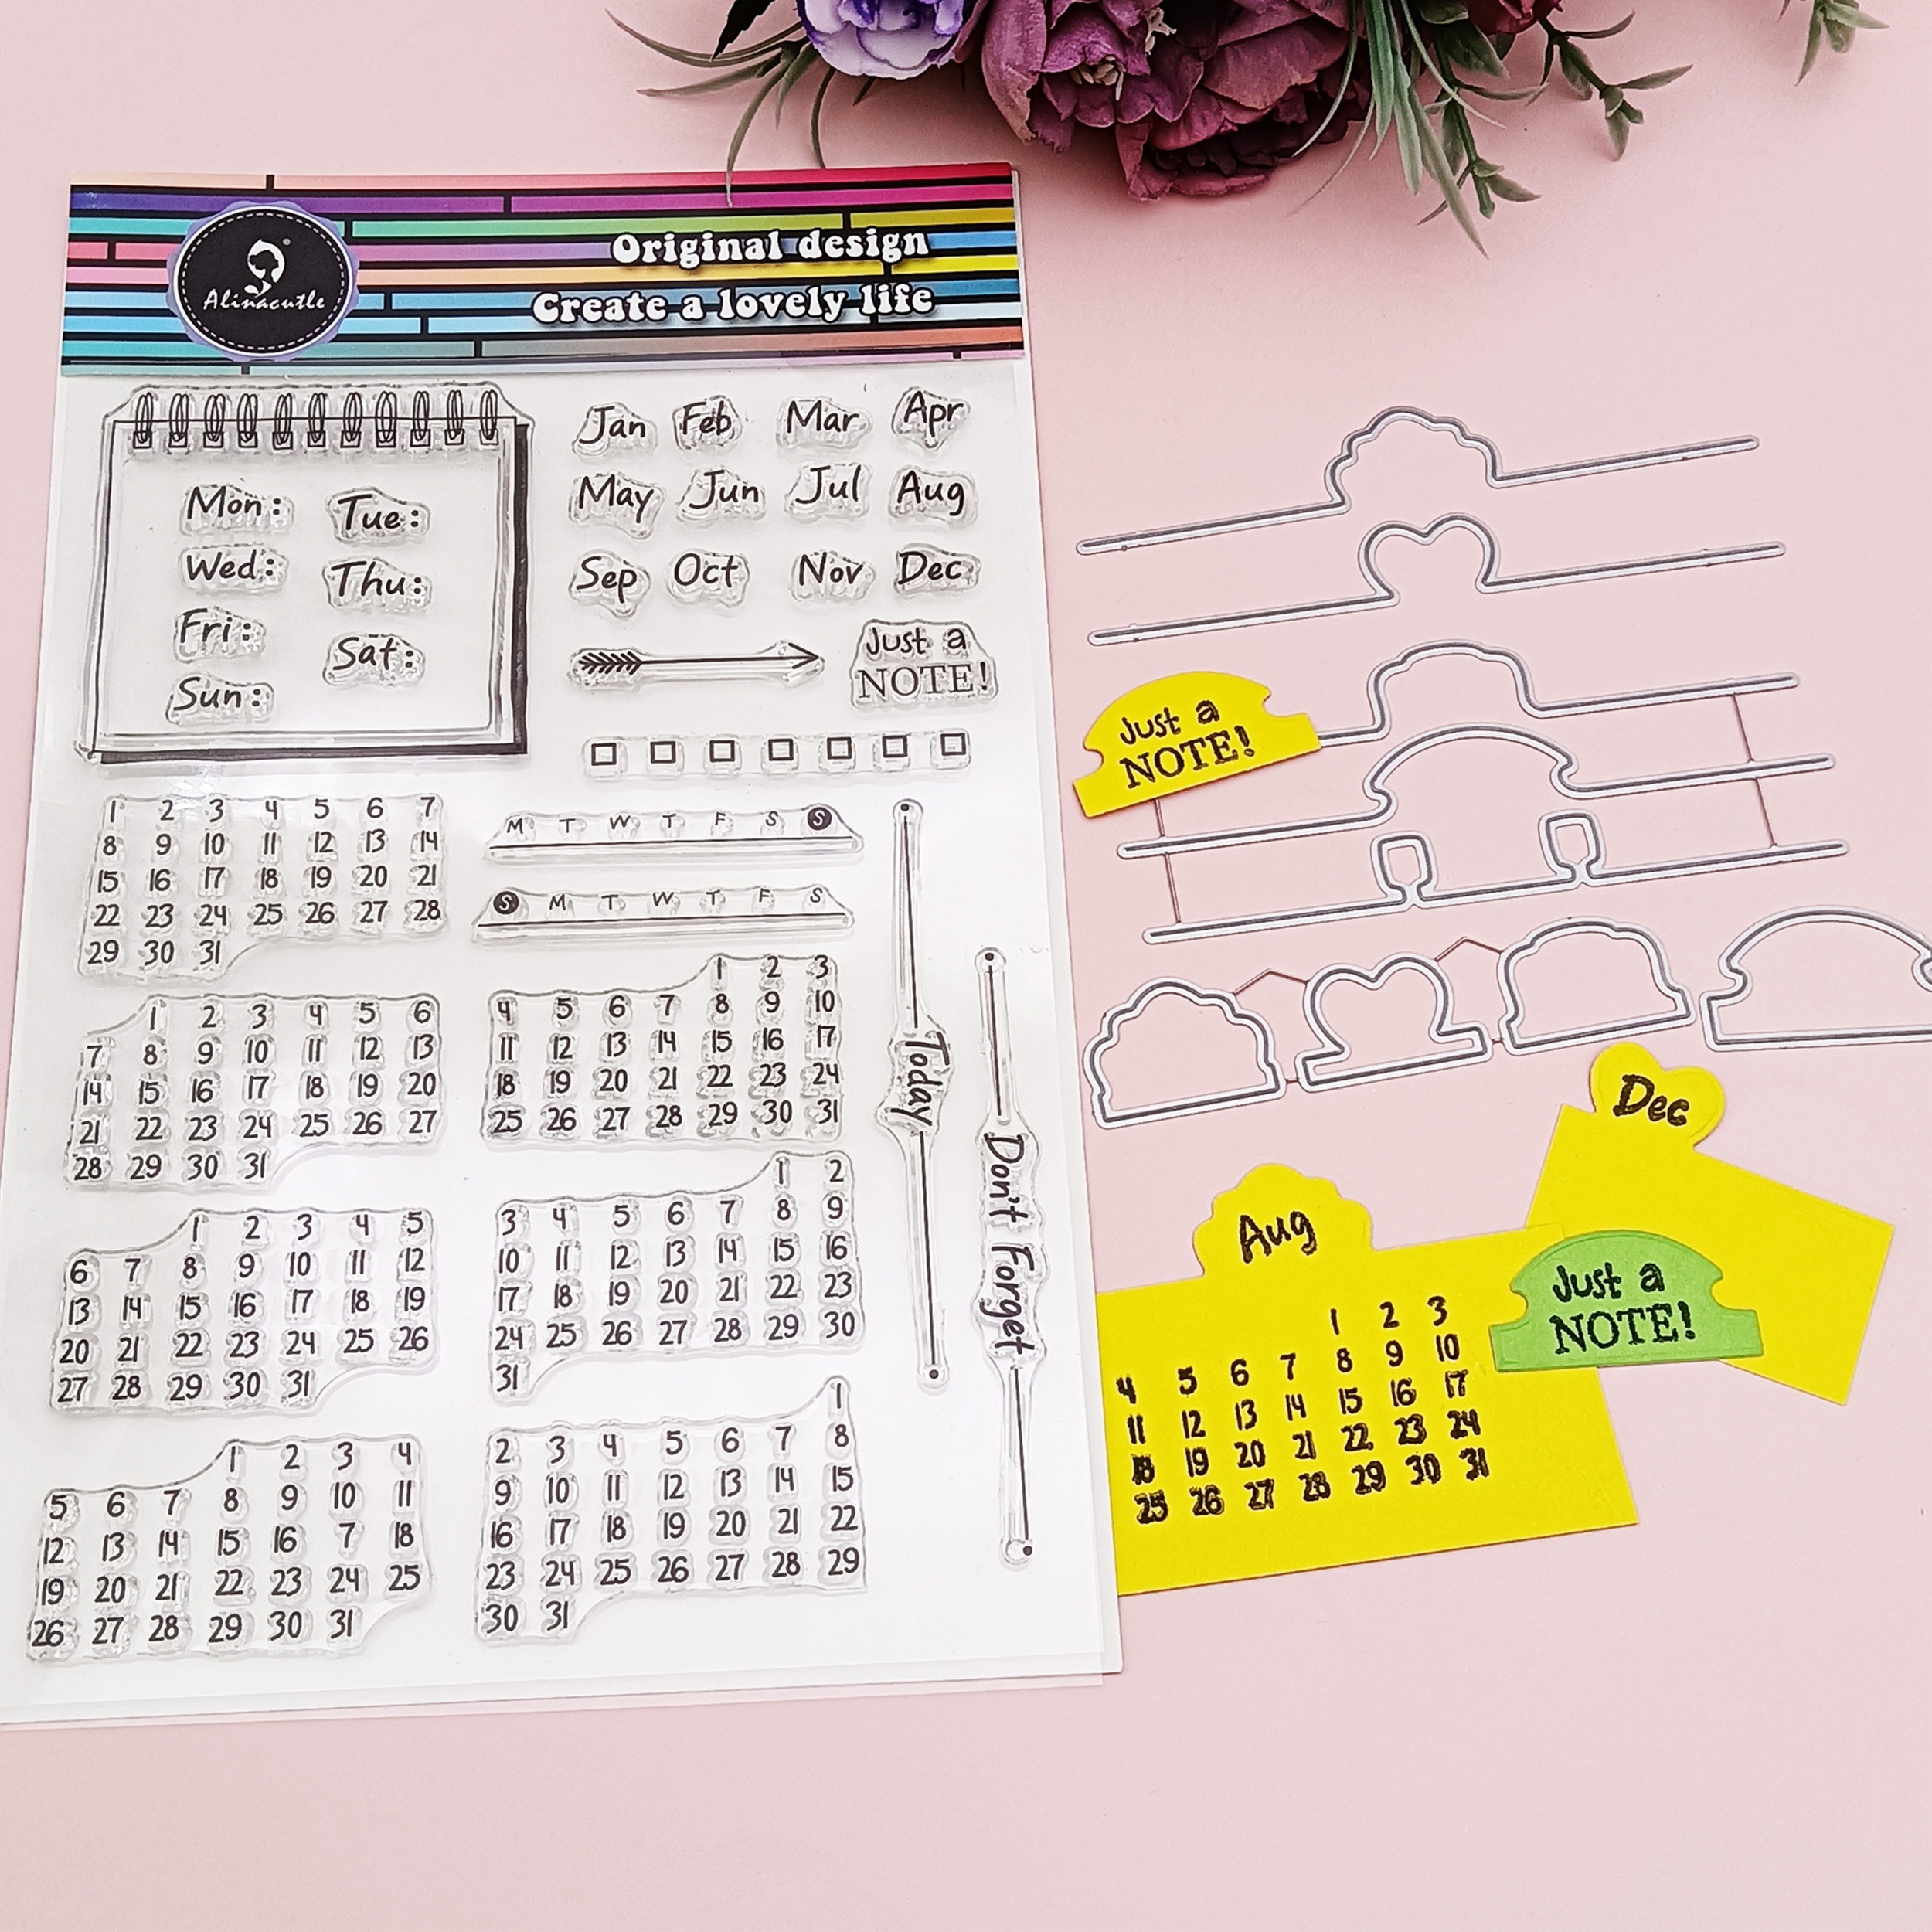 Journal Stamps Set Wood Rubber Decoration Stamps Card Making Scrapbooking  Planning DIY 5 Styles Frame Border Glass Cover Flowers Numbers 